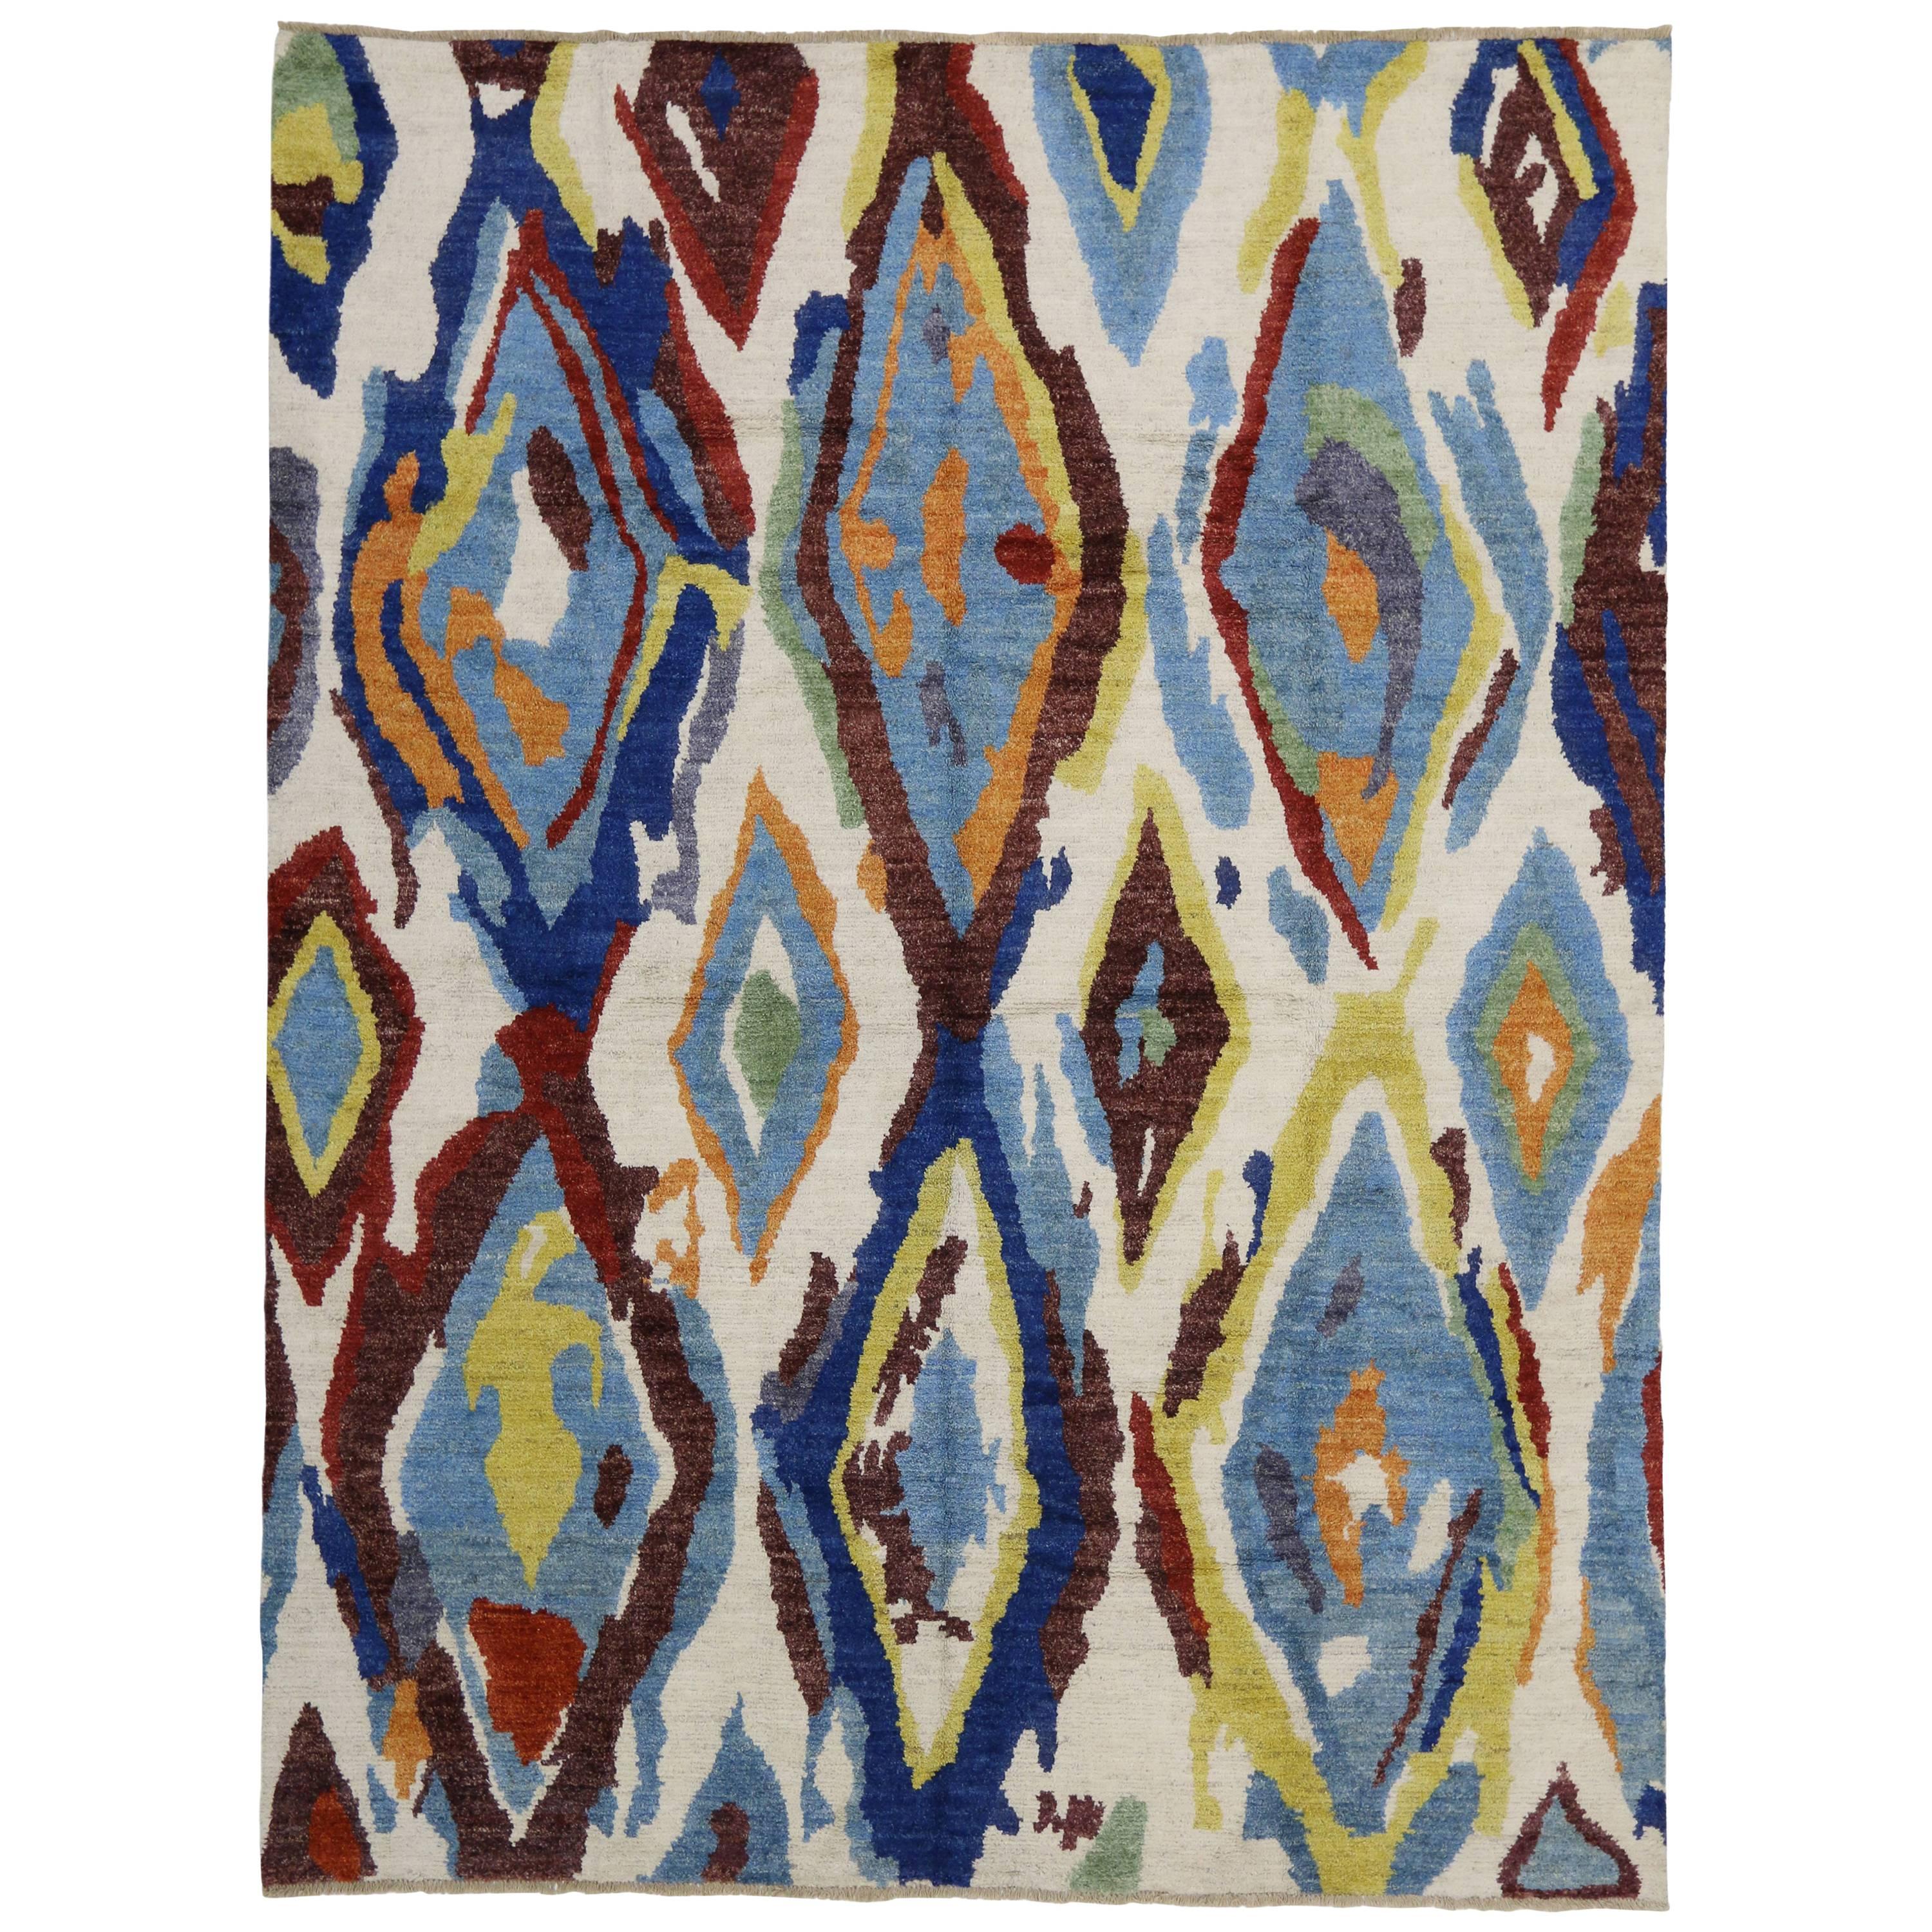 New Colorful Contemporary Moroccan Area Rug with Postmodern Memphis Style